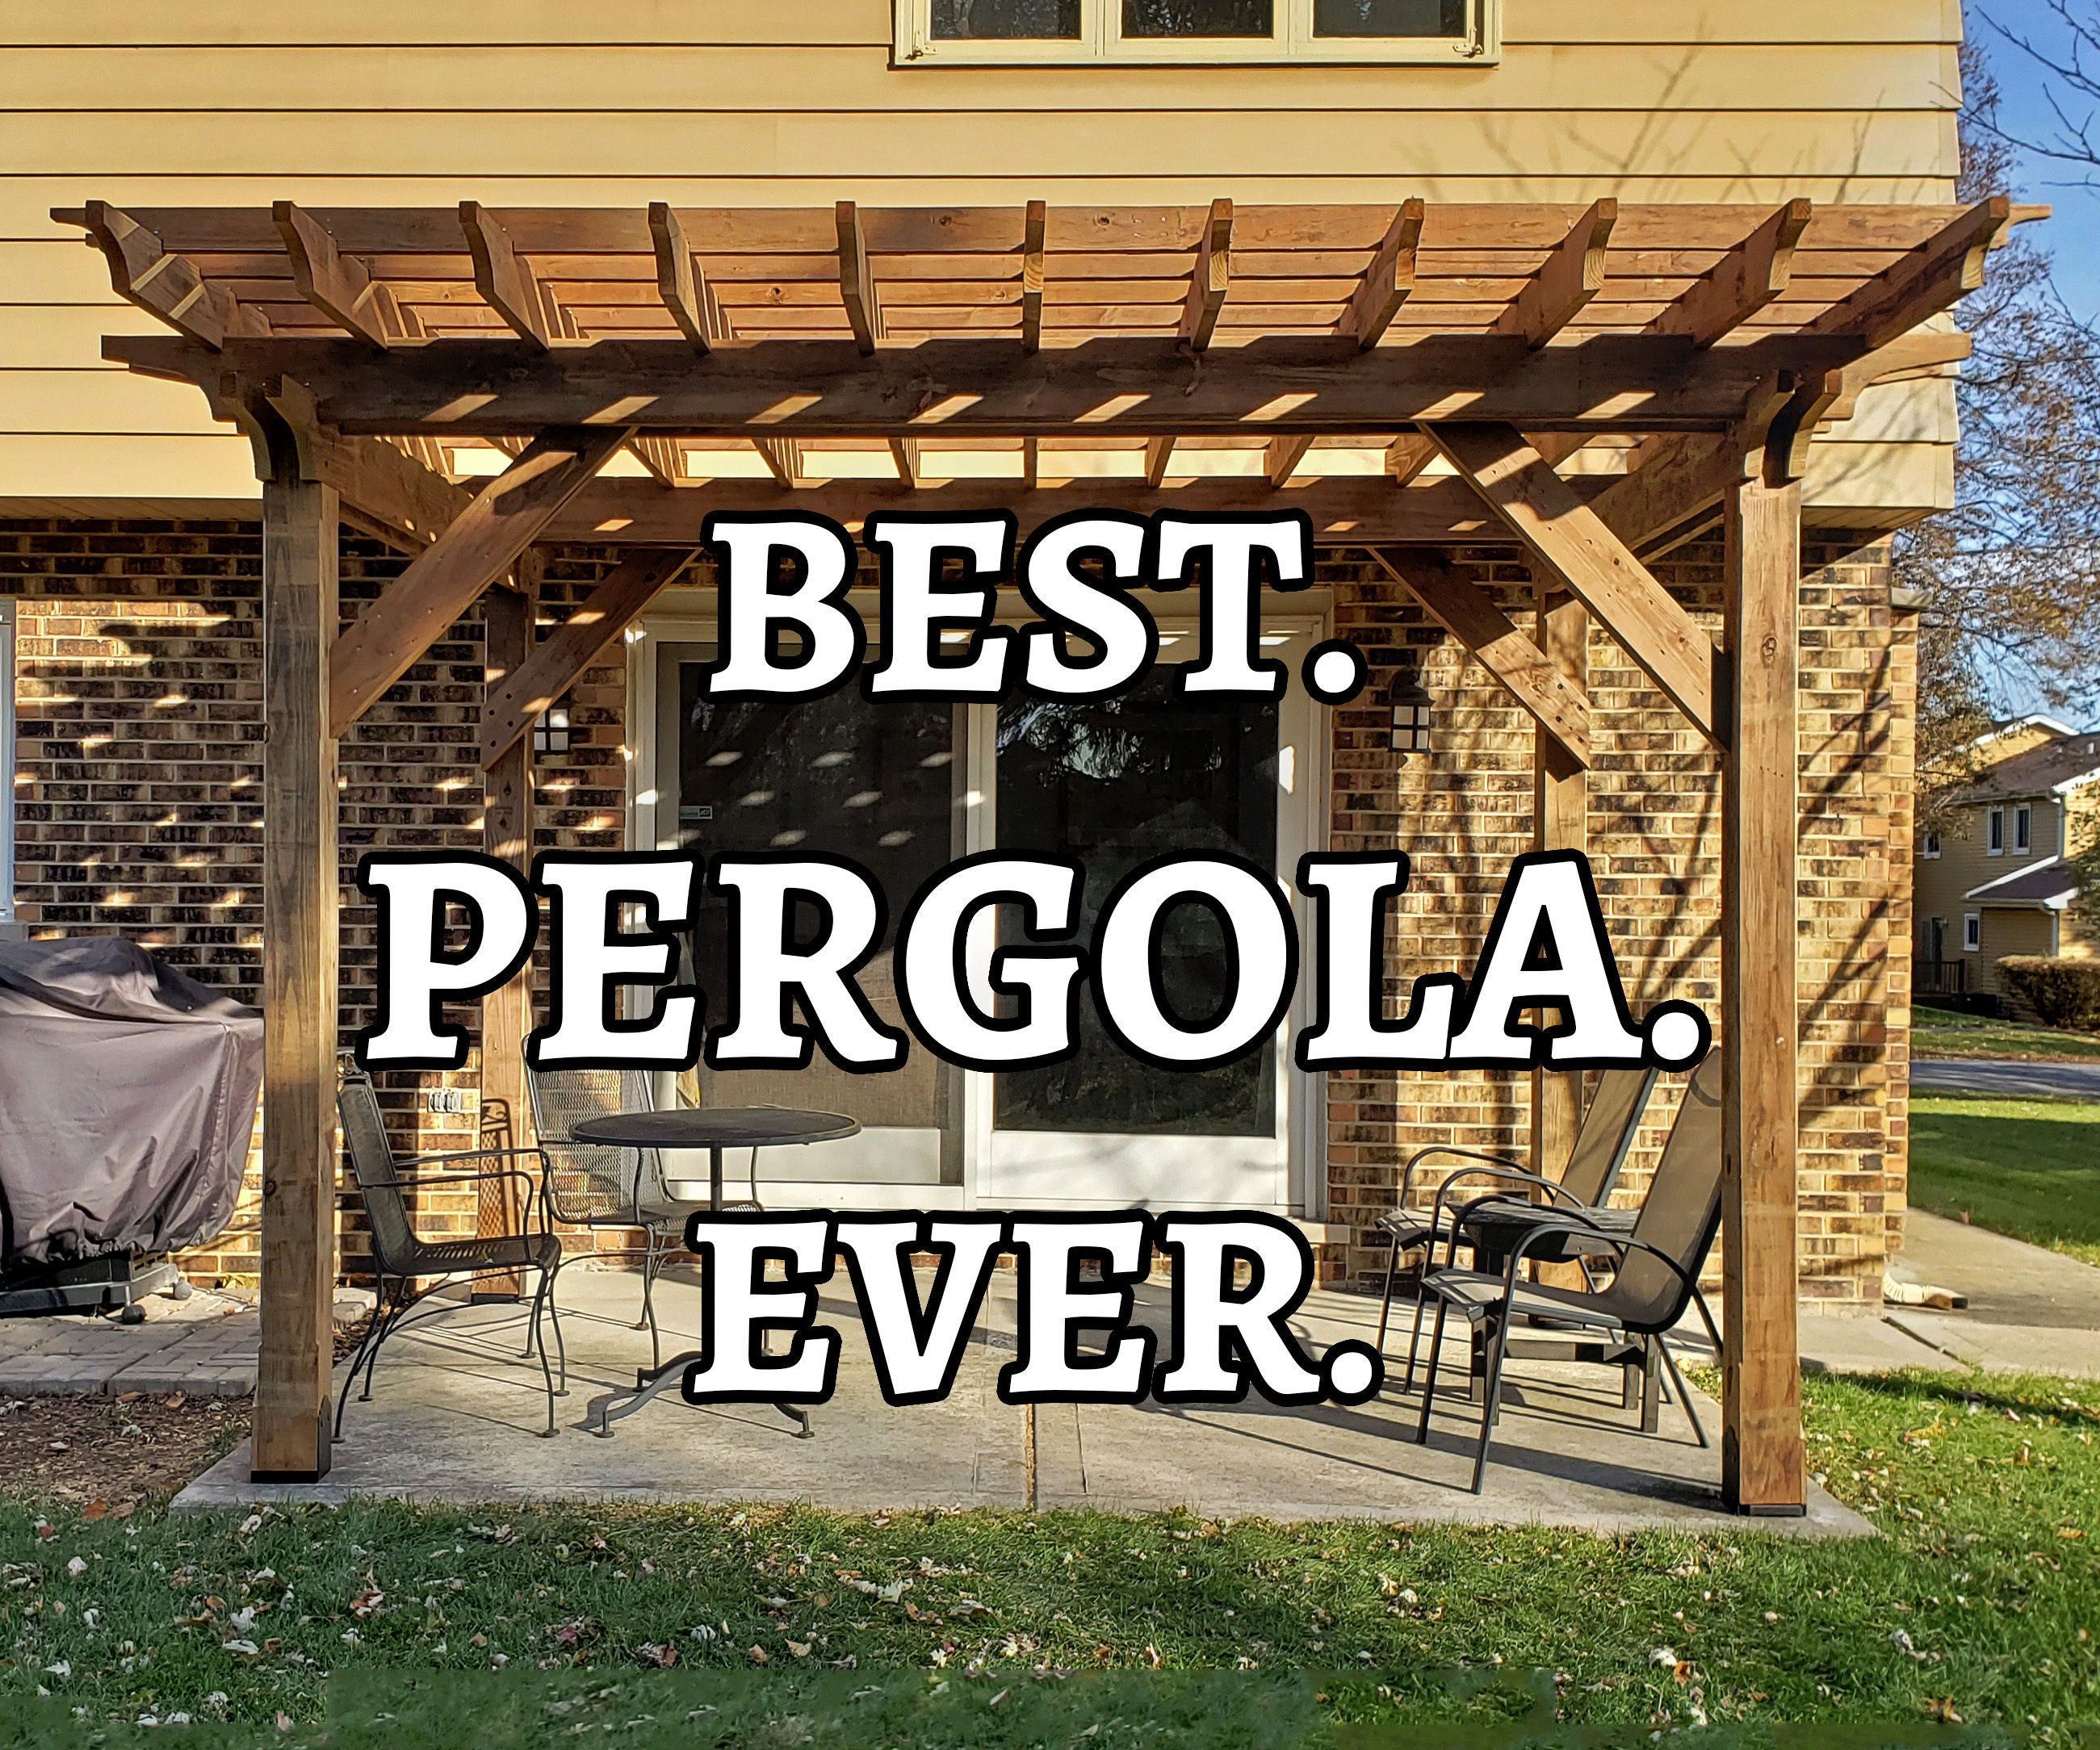 How to Build a Pergola on a Concrete Patio in Two Days